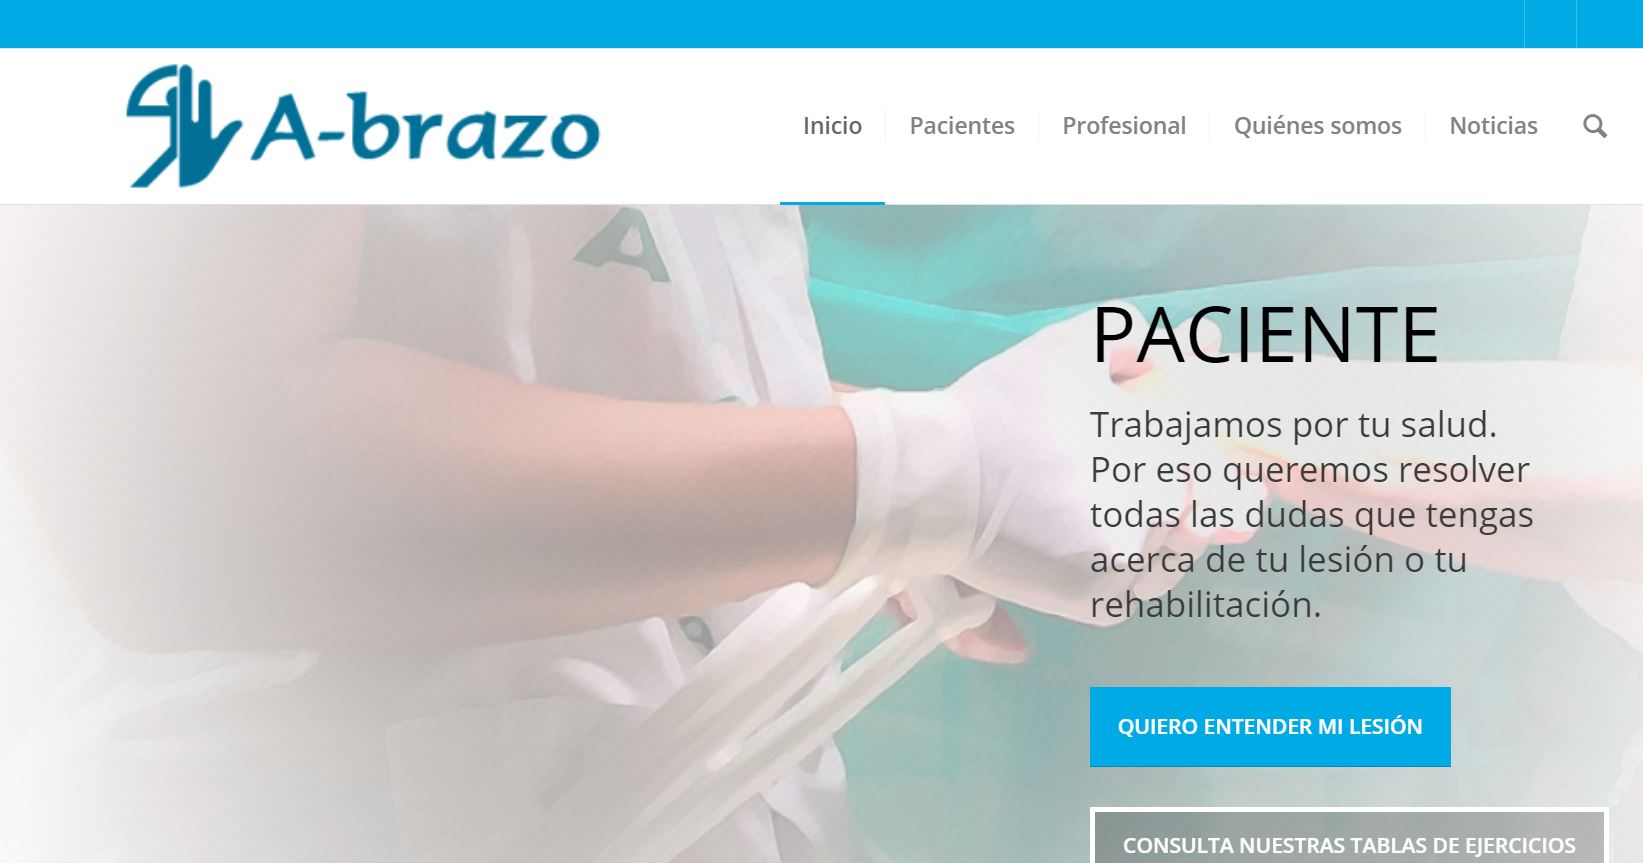 Proyecto A-brazo